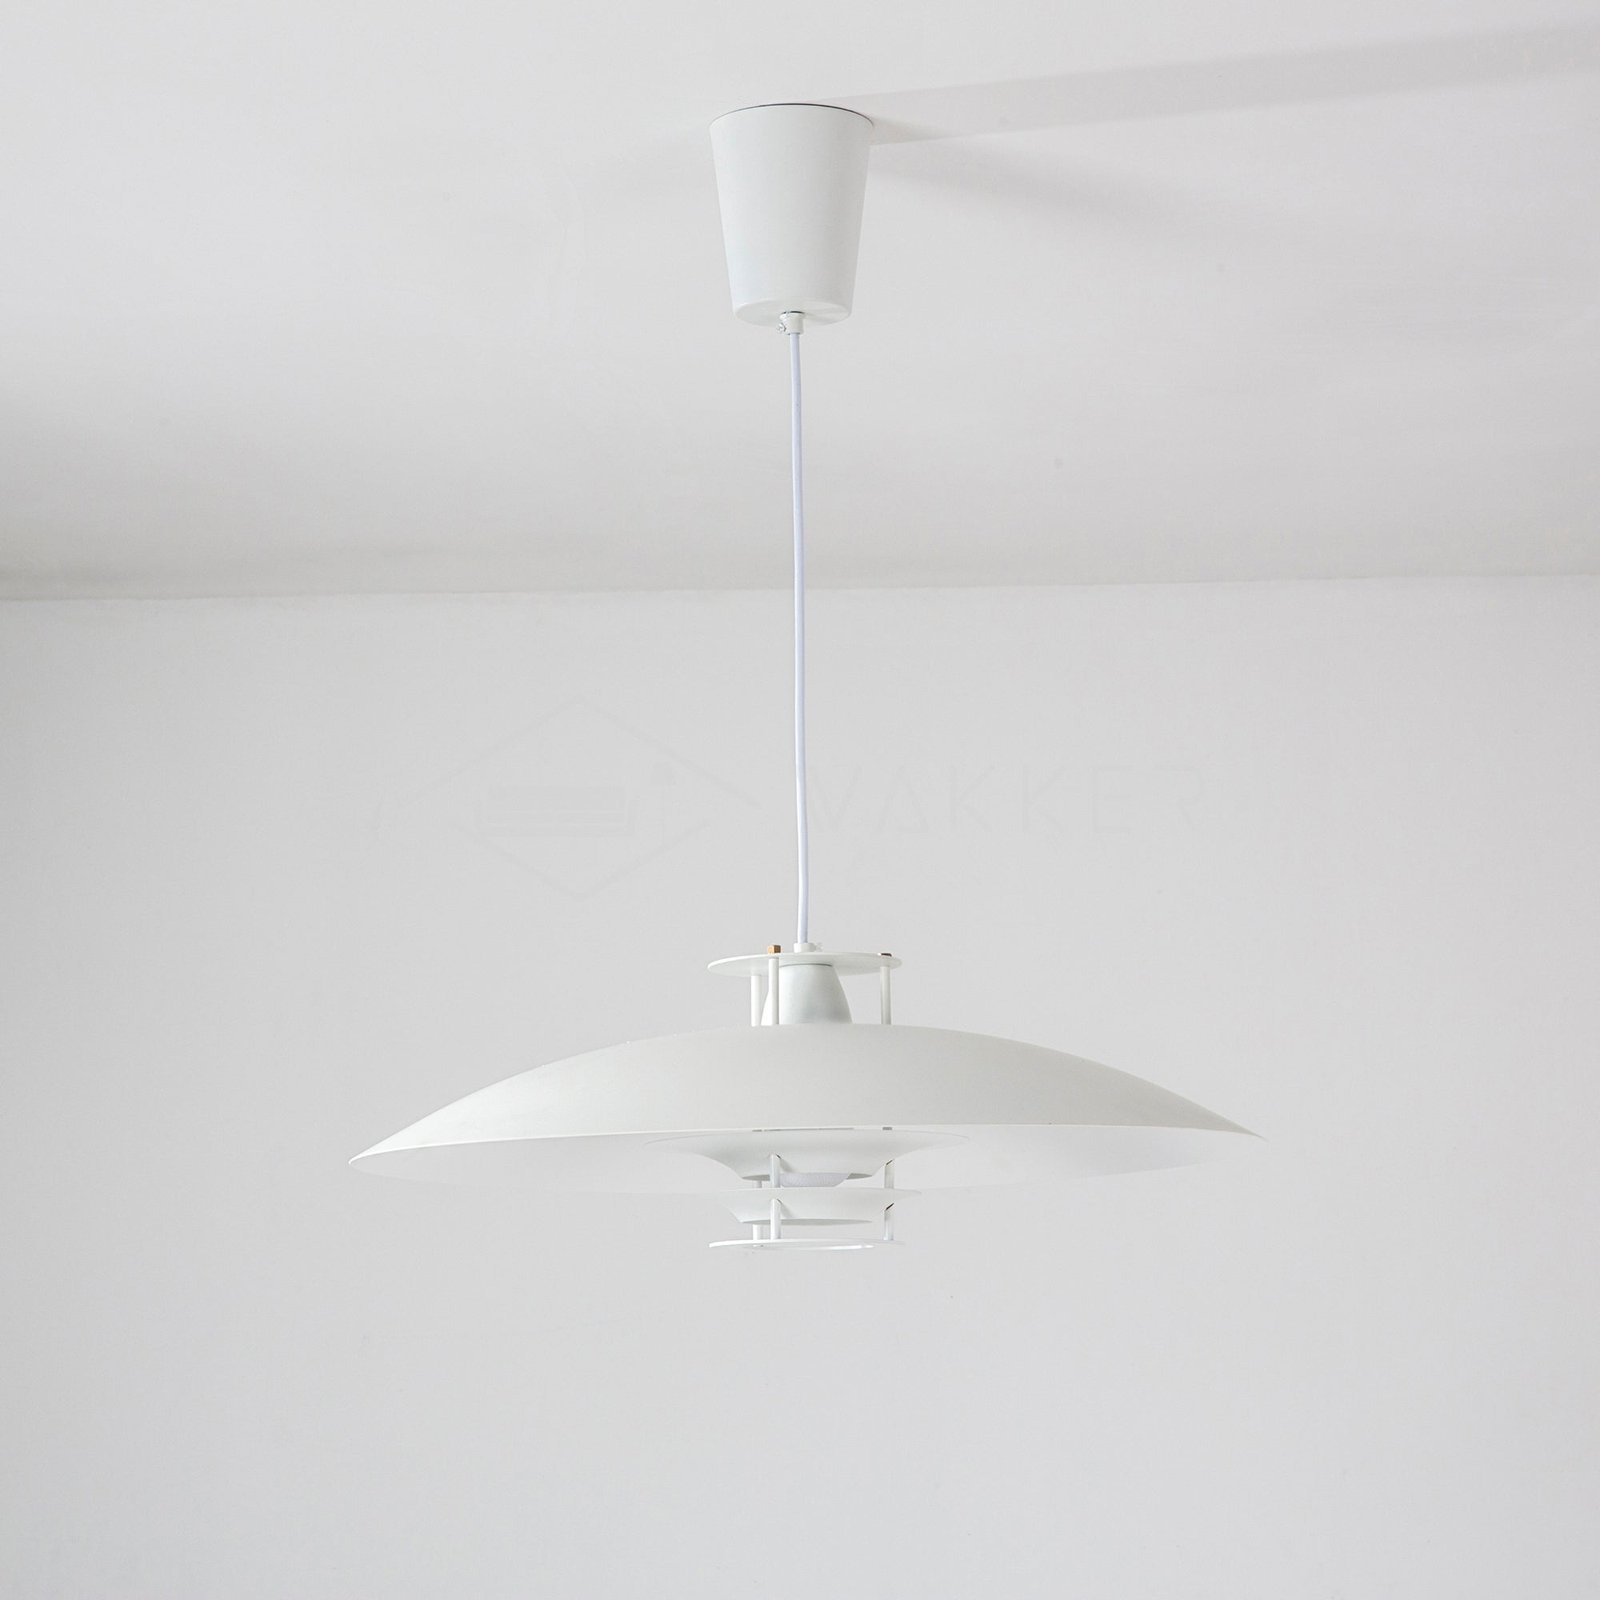 White JL 341 Pendant Light - Size: 22.1 inches in diameter and 7.1 inches in height (or 56cm in diameter and 18cm in height)